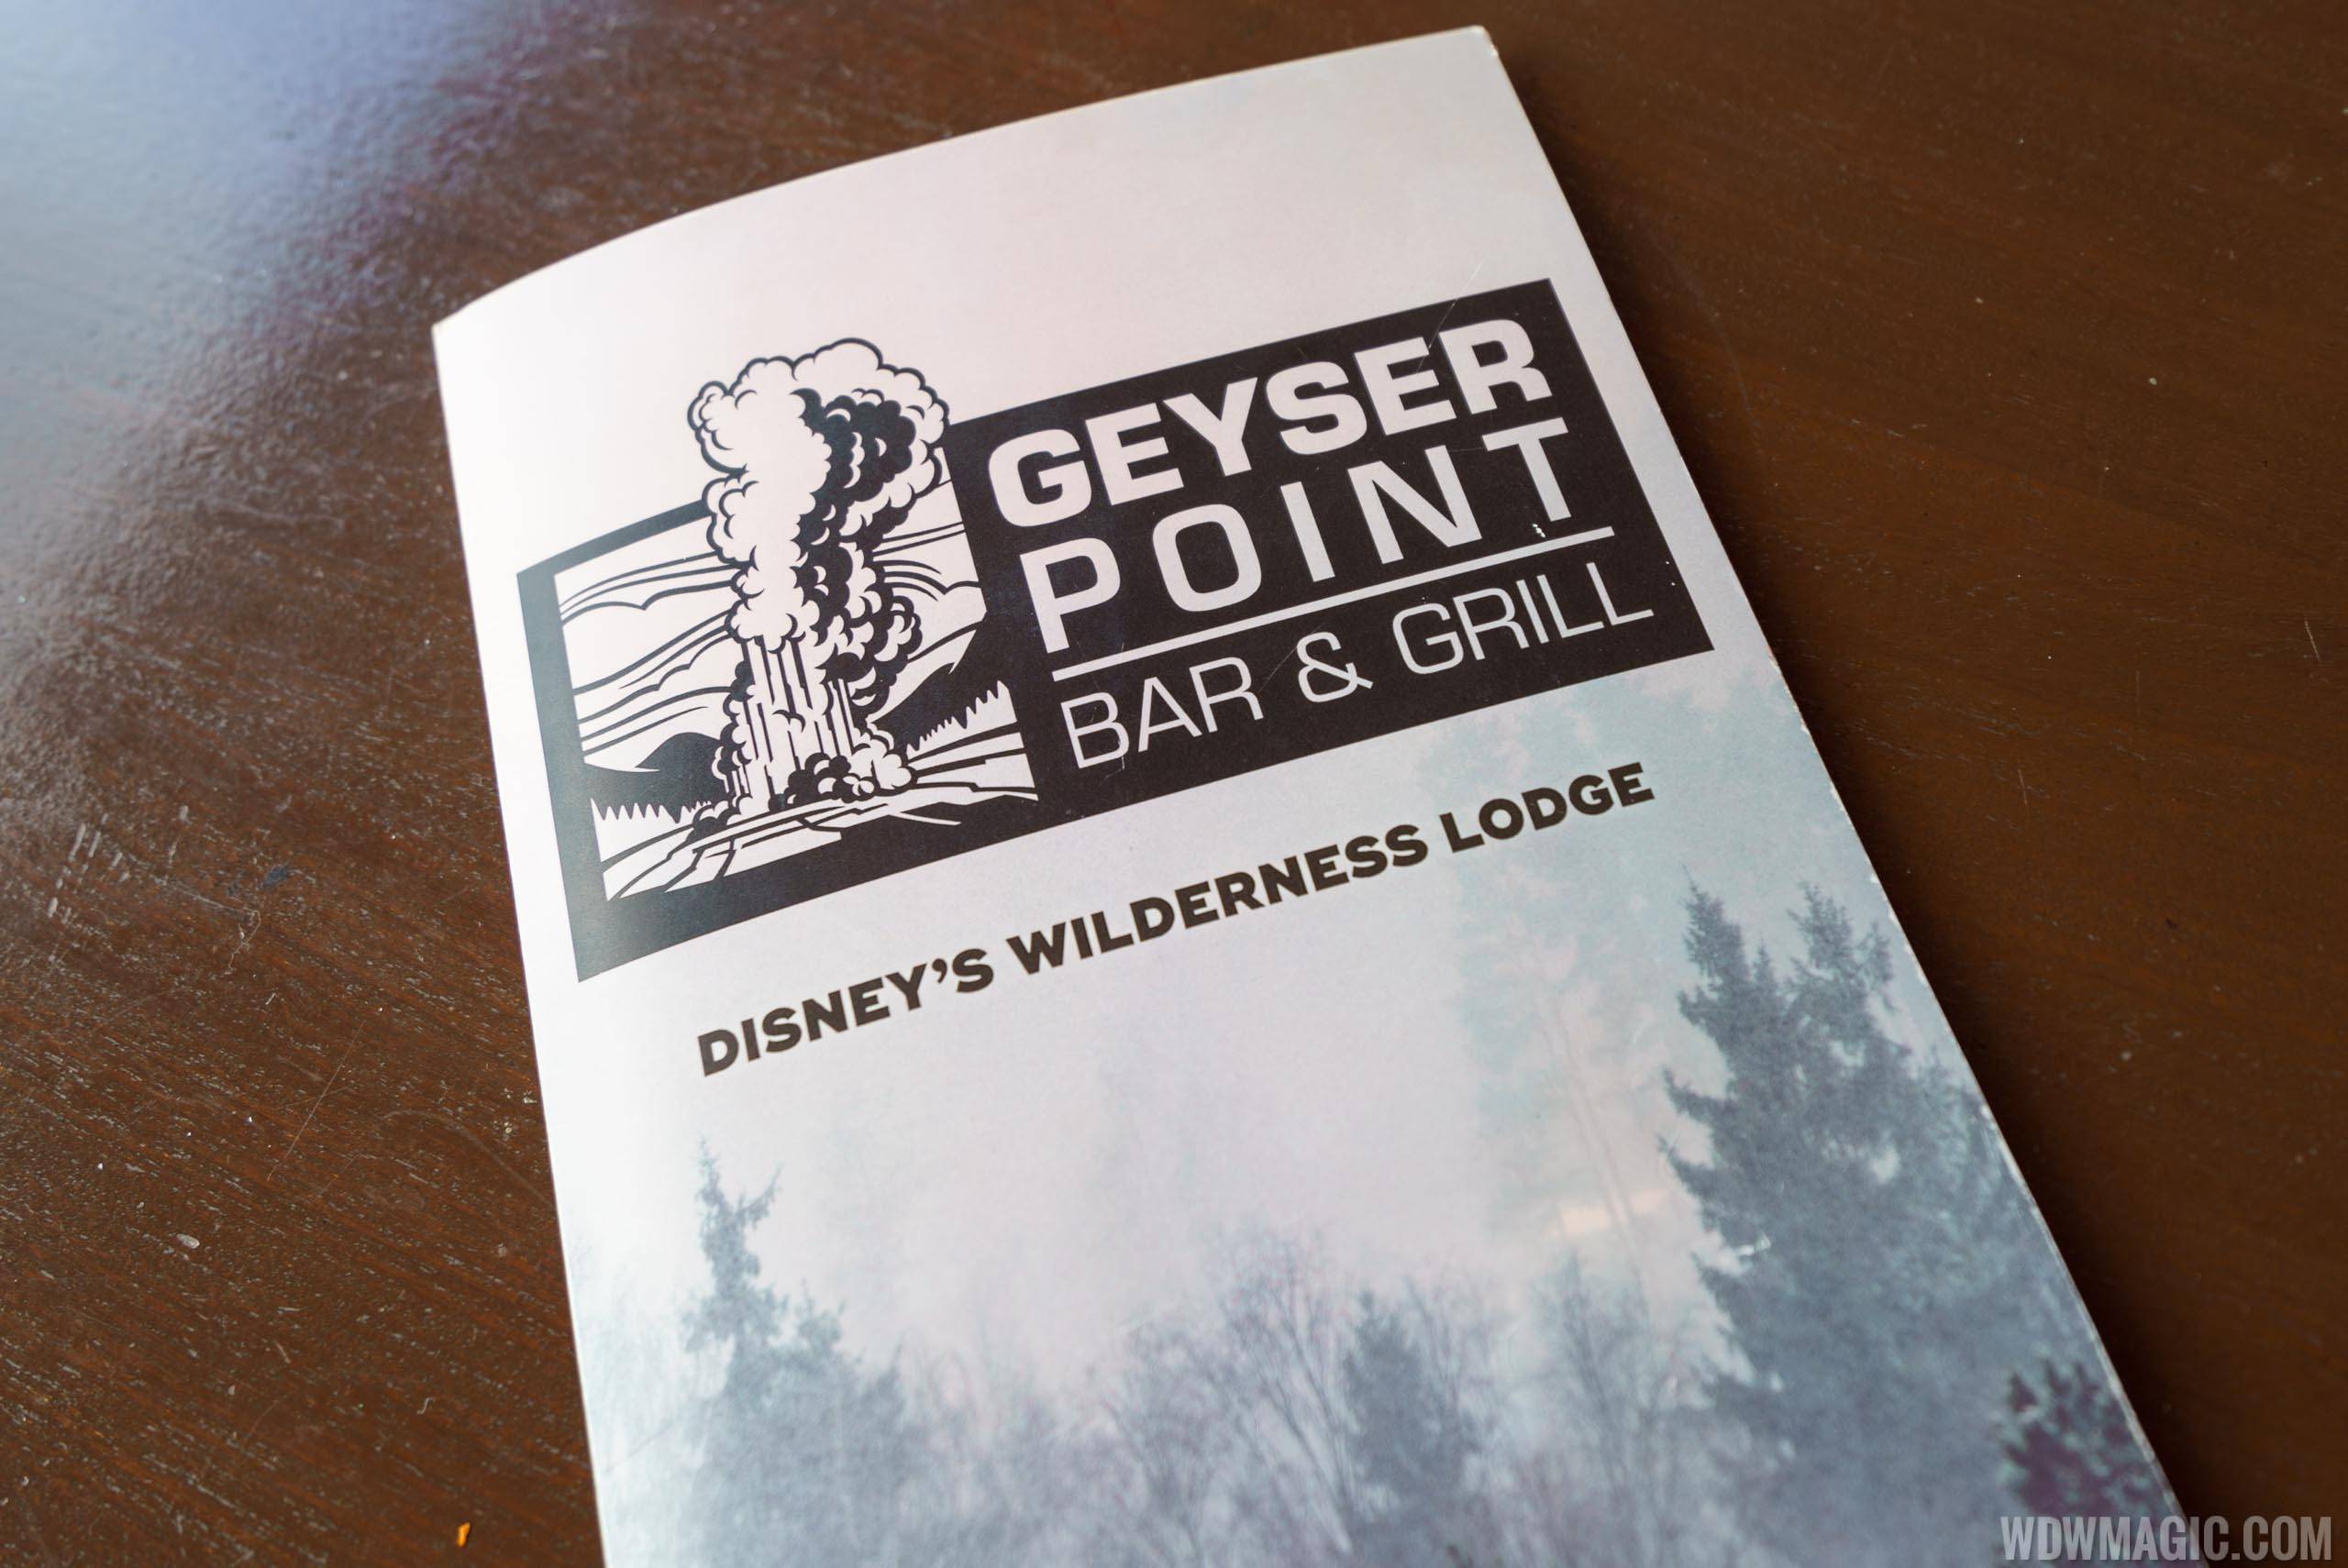 Geyser Point Bar and Grill